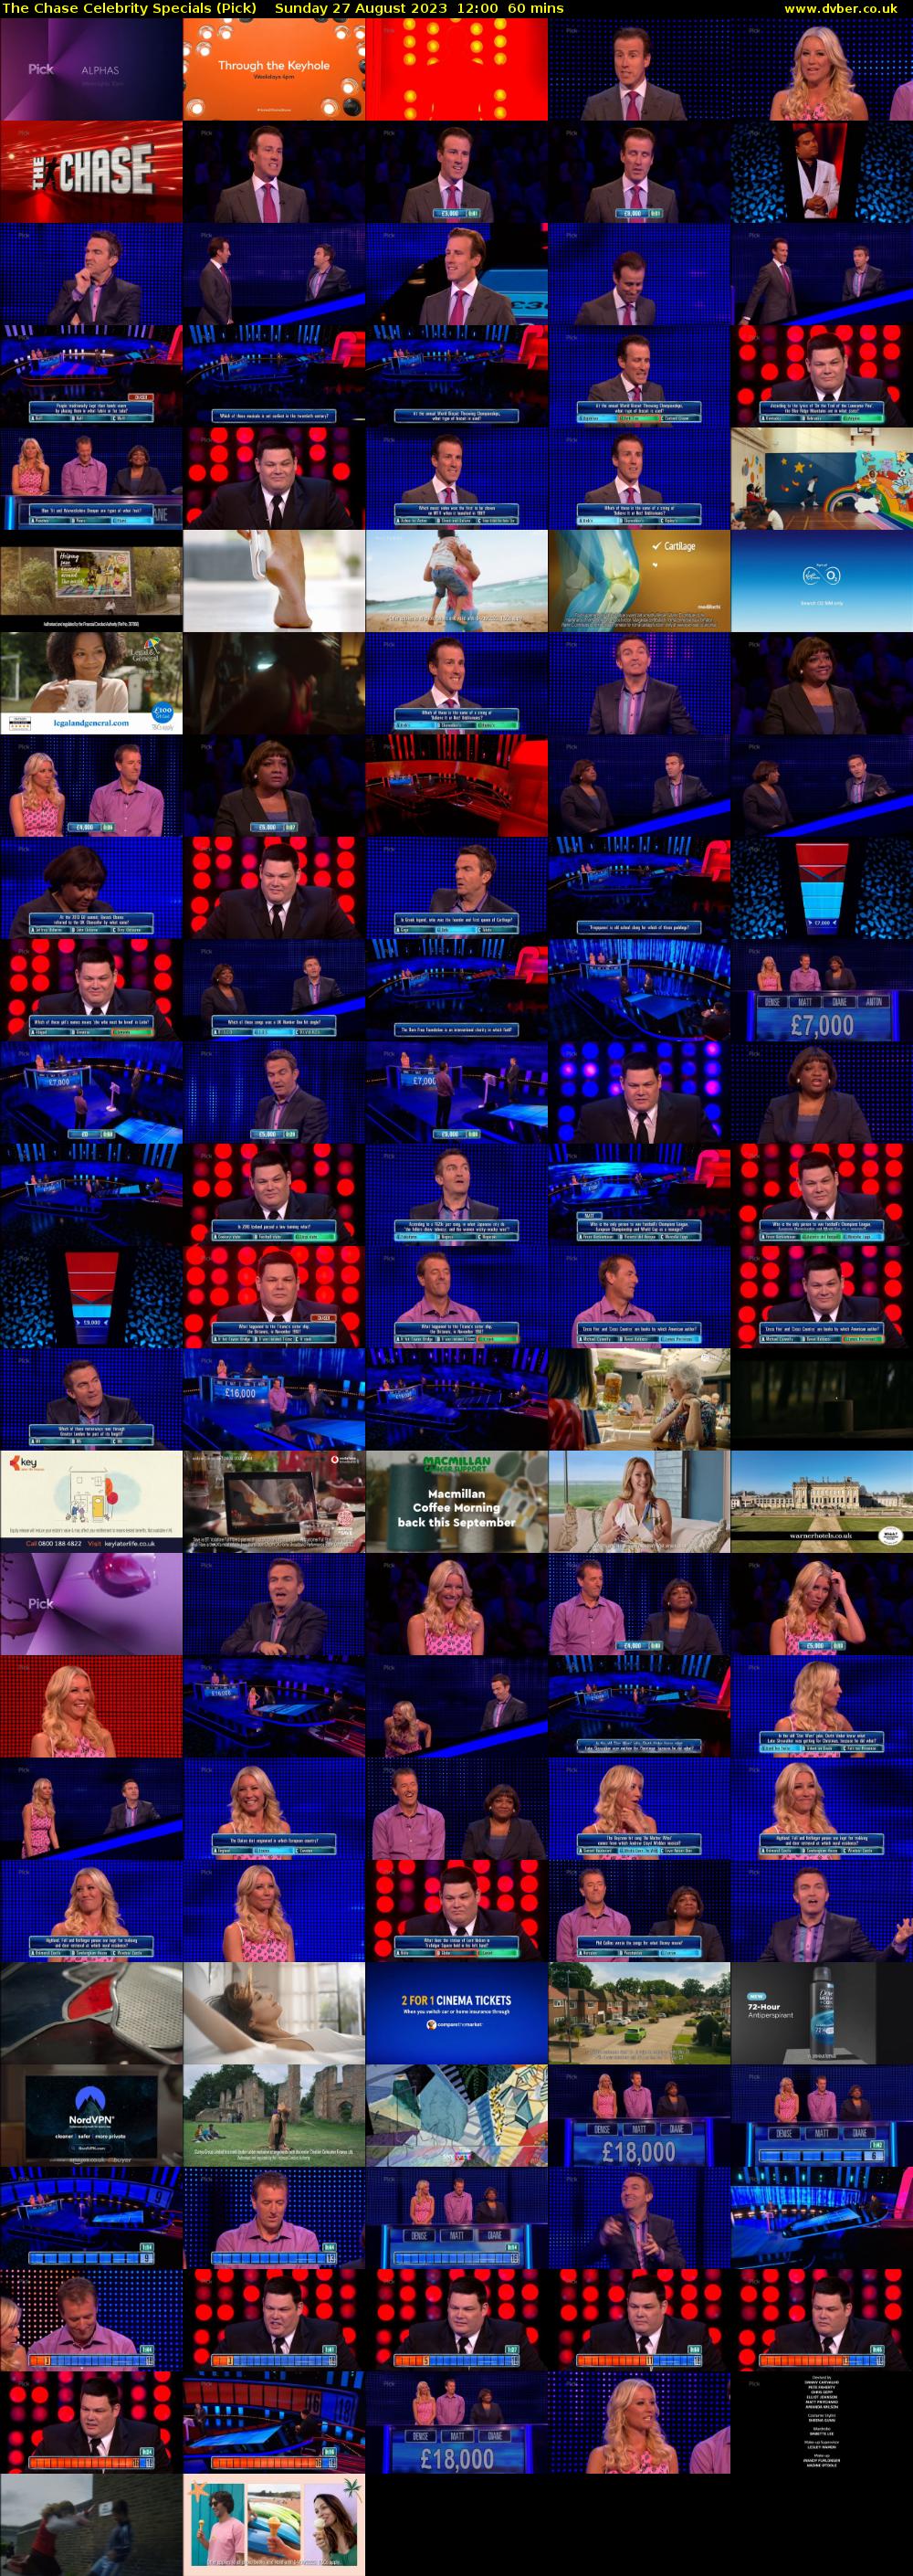 The Chase Celebrity Specials (Pick) Sunday 27 August 2023 12:00 - 13:00